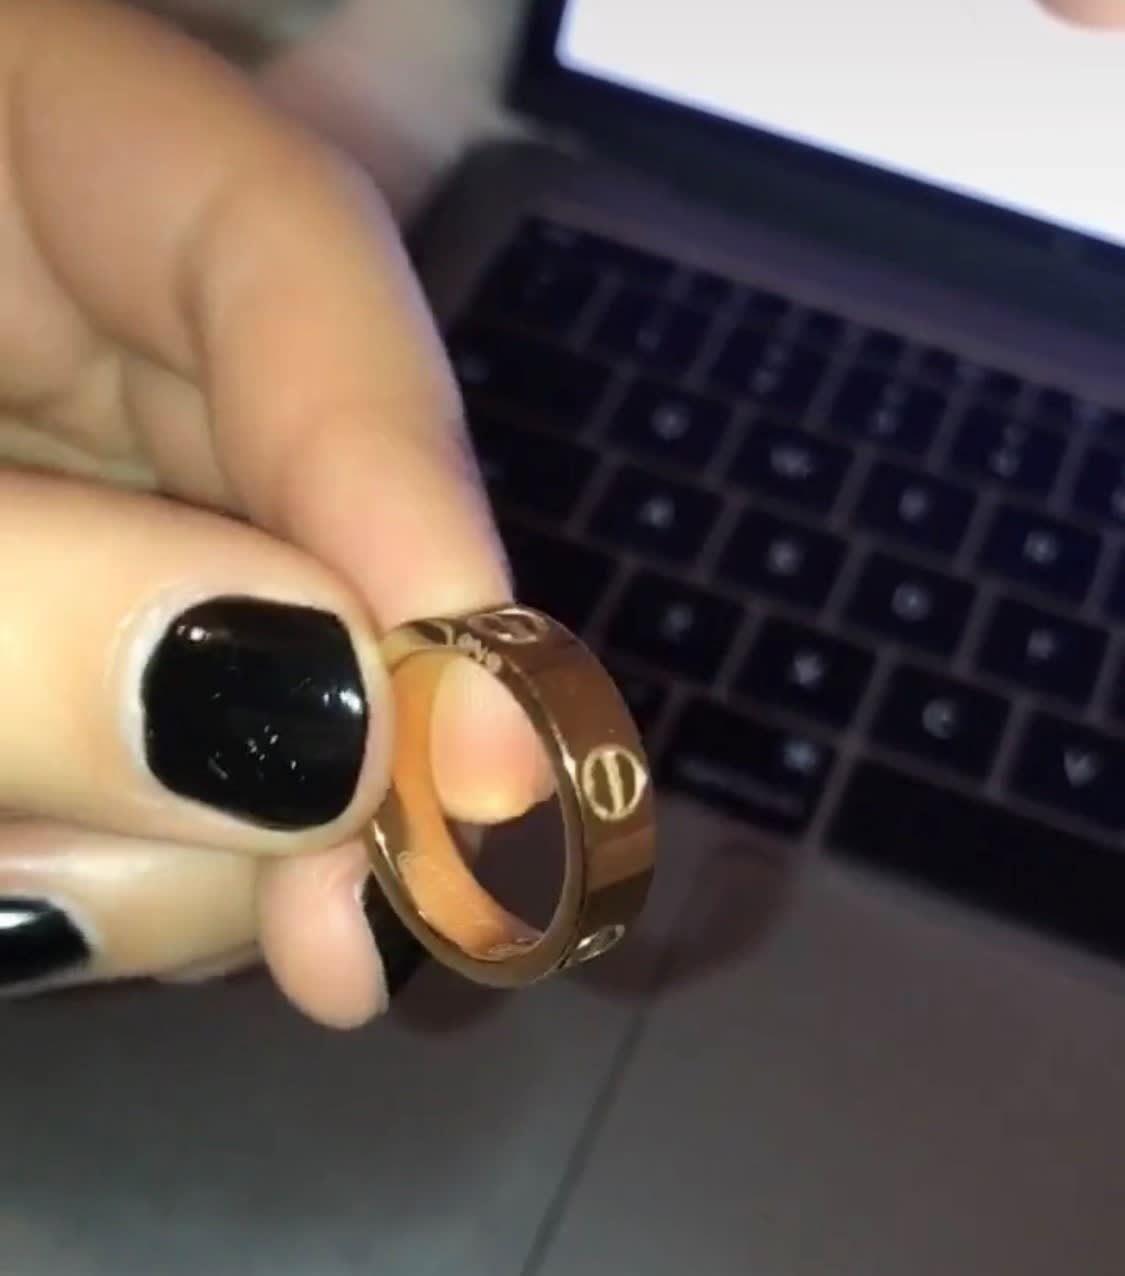 cartier ring dhgate